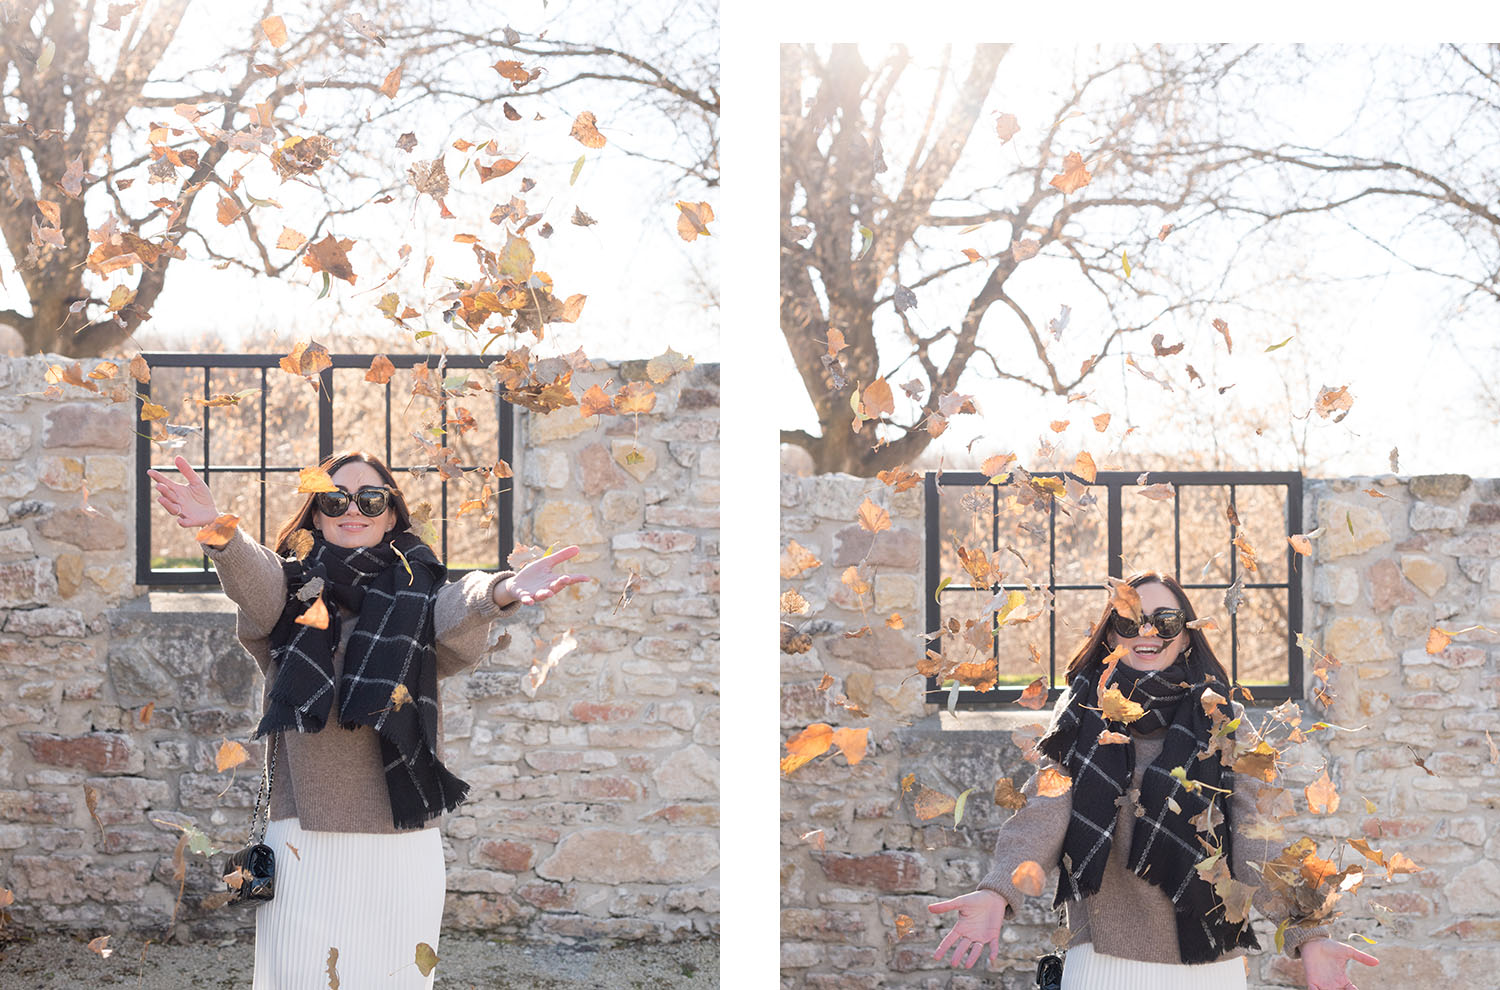 Top Canadian fashion blogger Cee Fardoe of Coco & Vera throws leaves in the air, wearing Celine Audrey sunglasses and a white Aritzia skirt